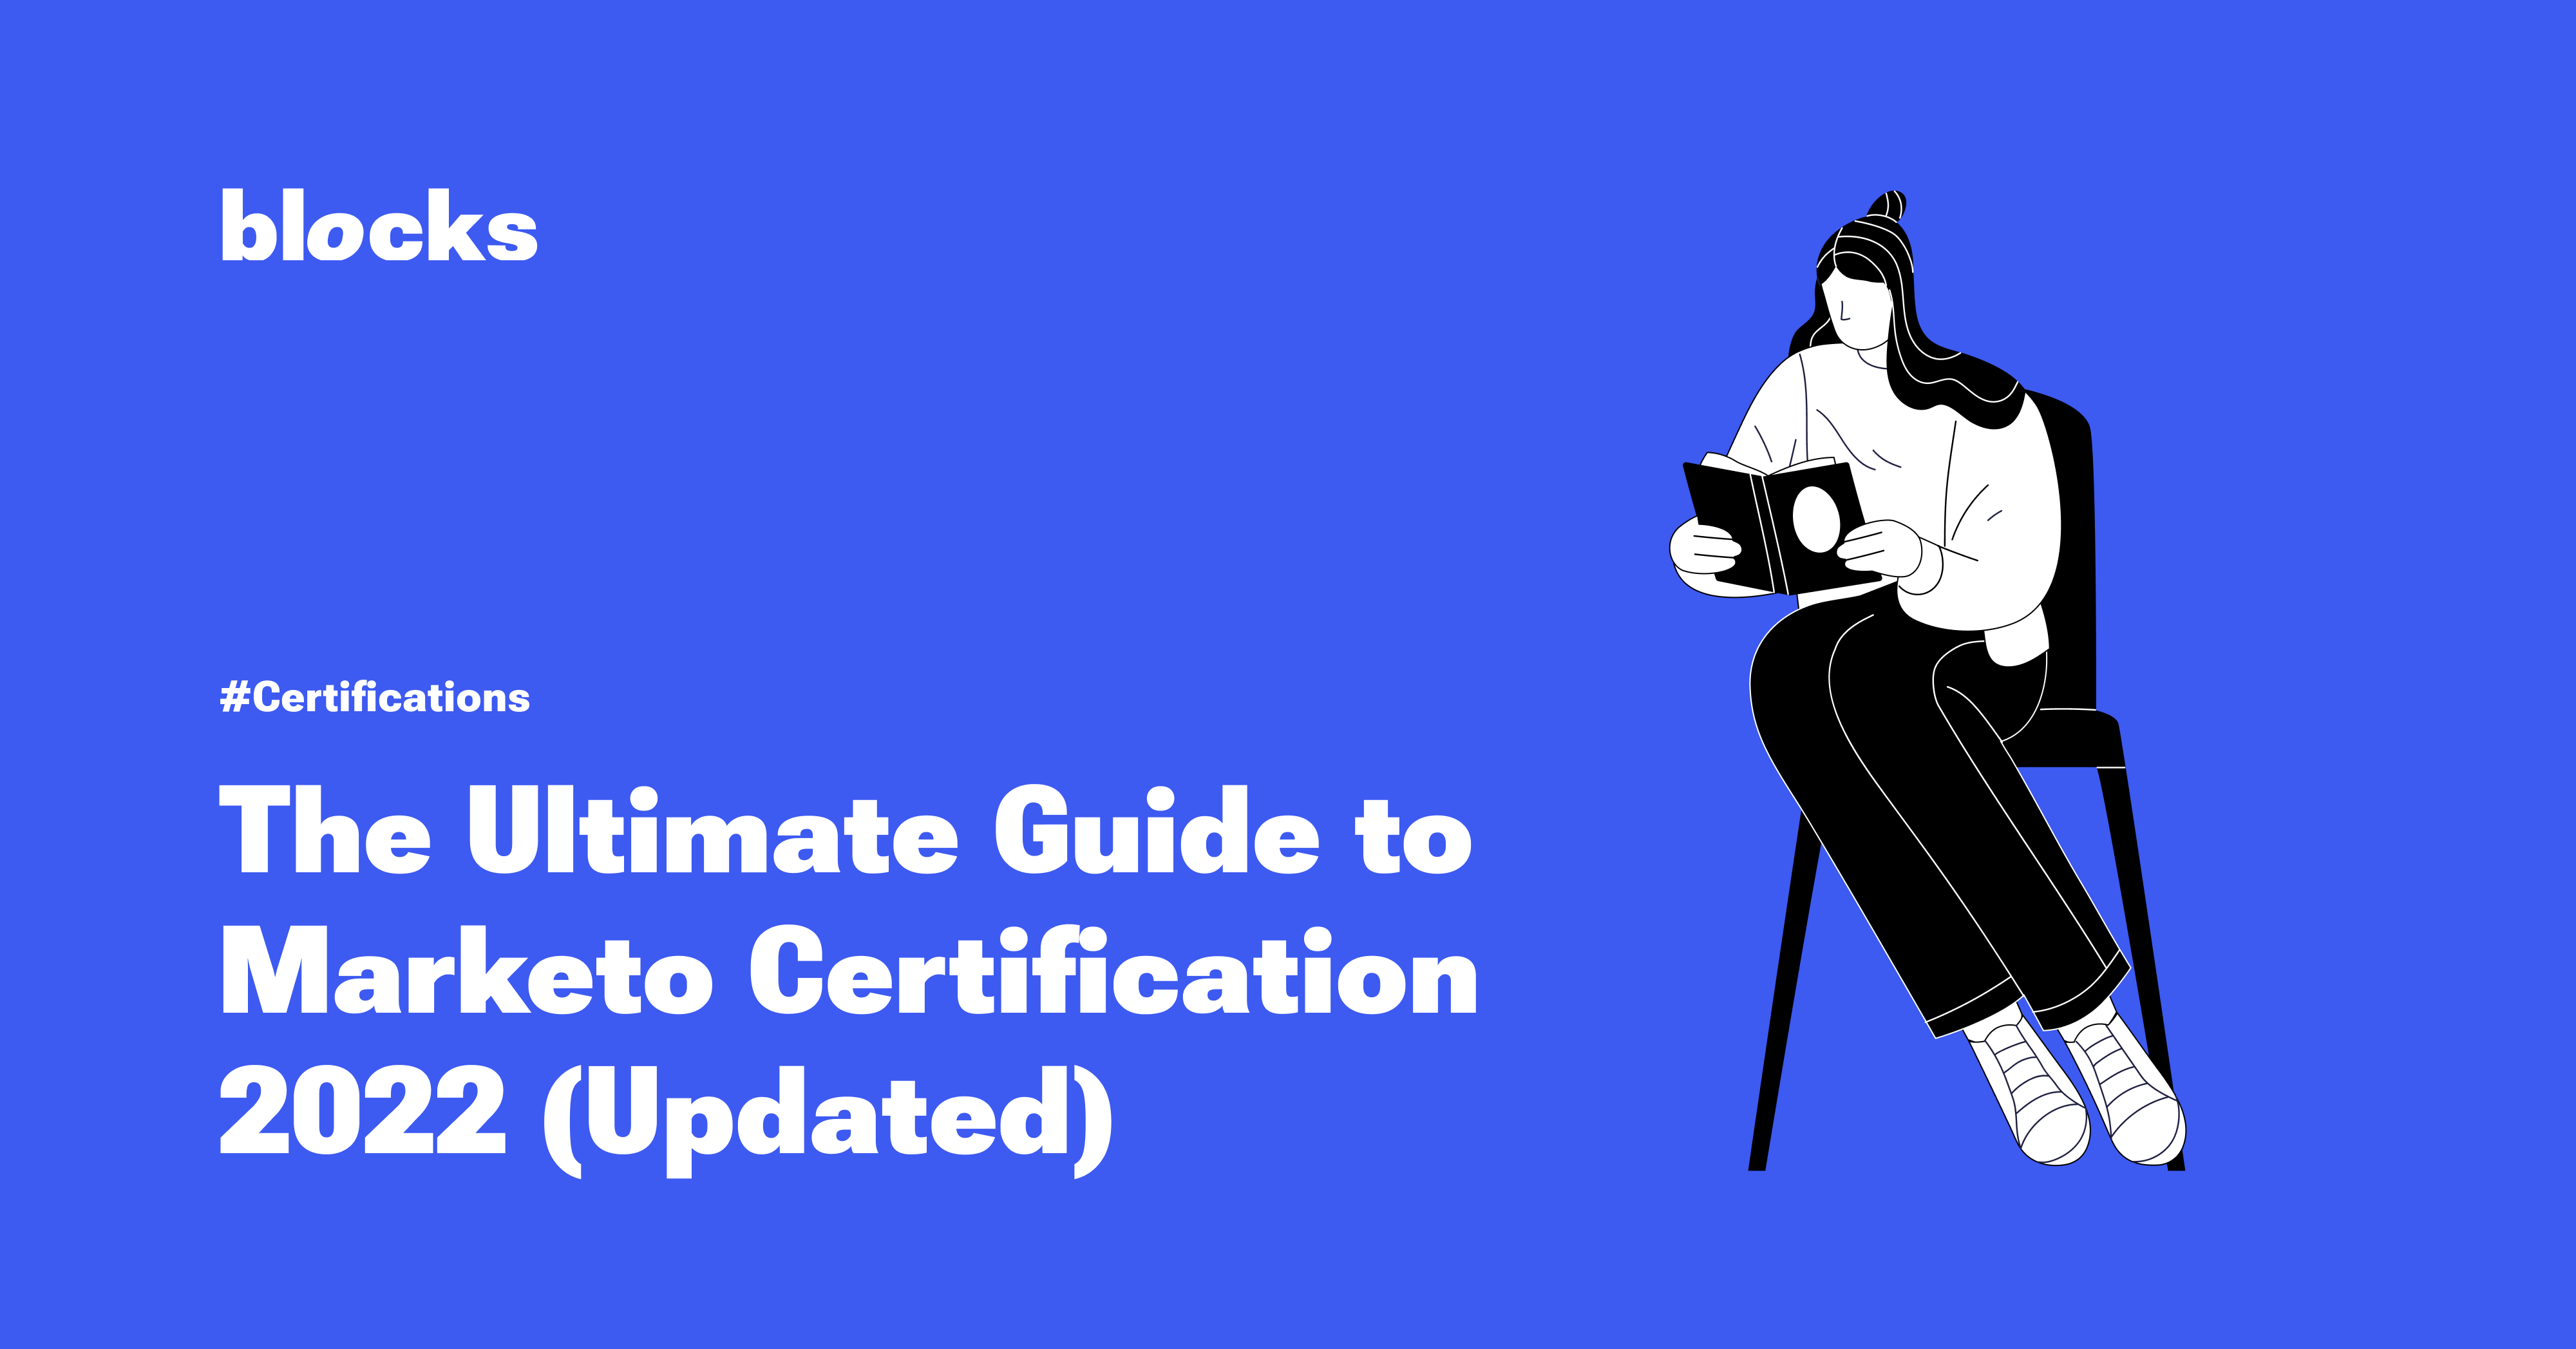 The Ultimate Guide to Marketo Certification 2023 (Updated) Blocks